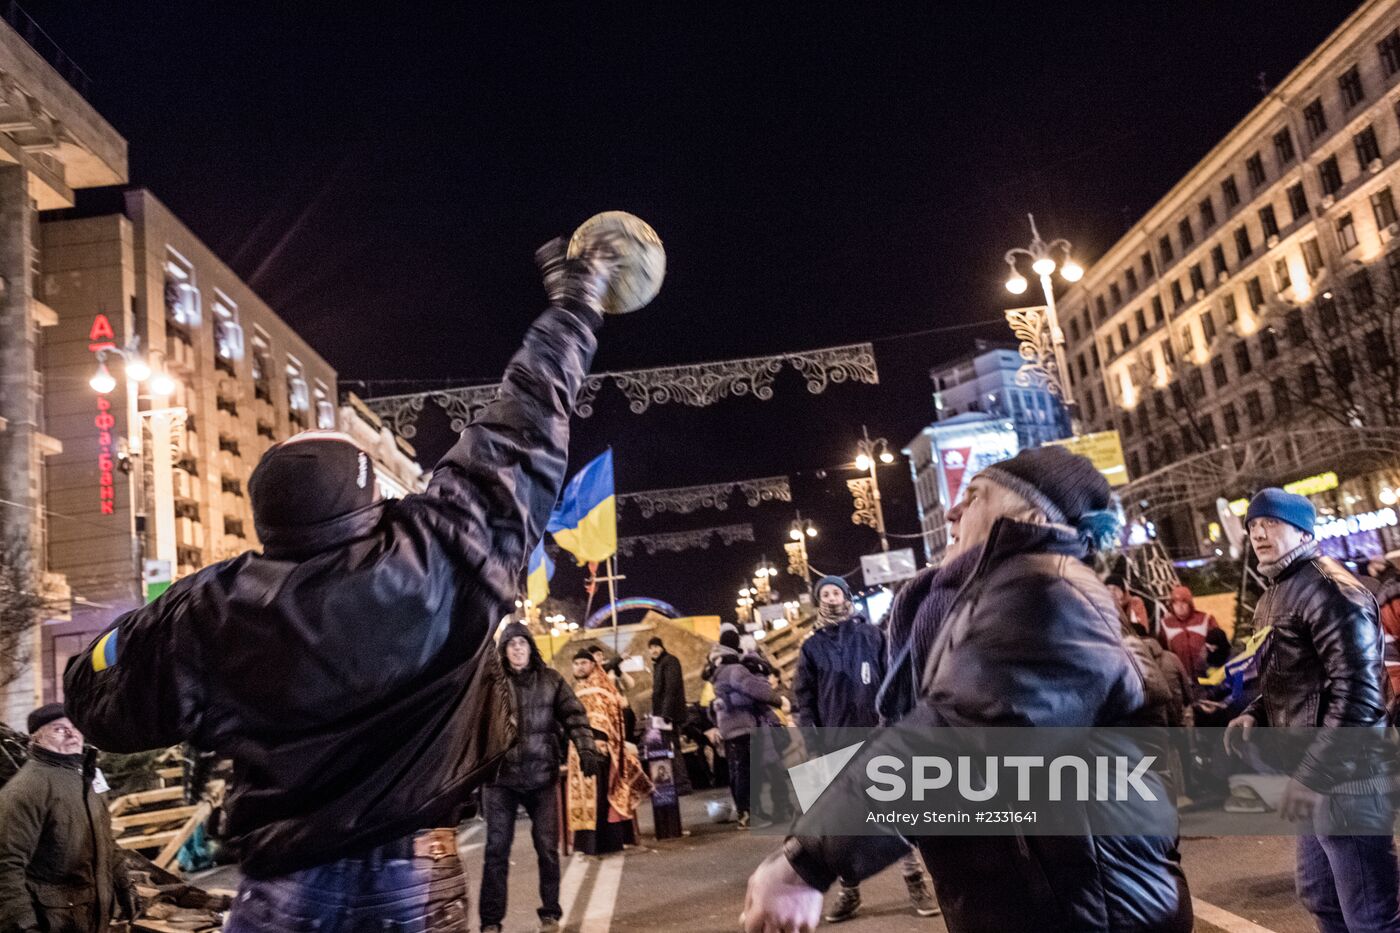 EU integration supporters' actions in Kiev